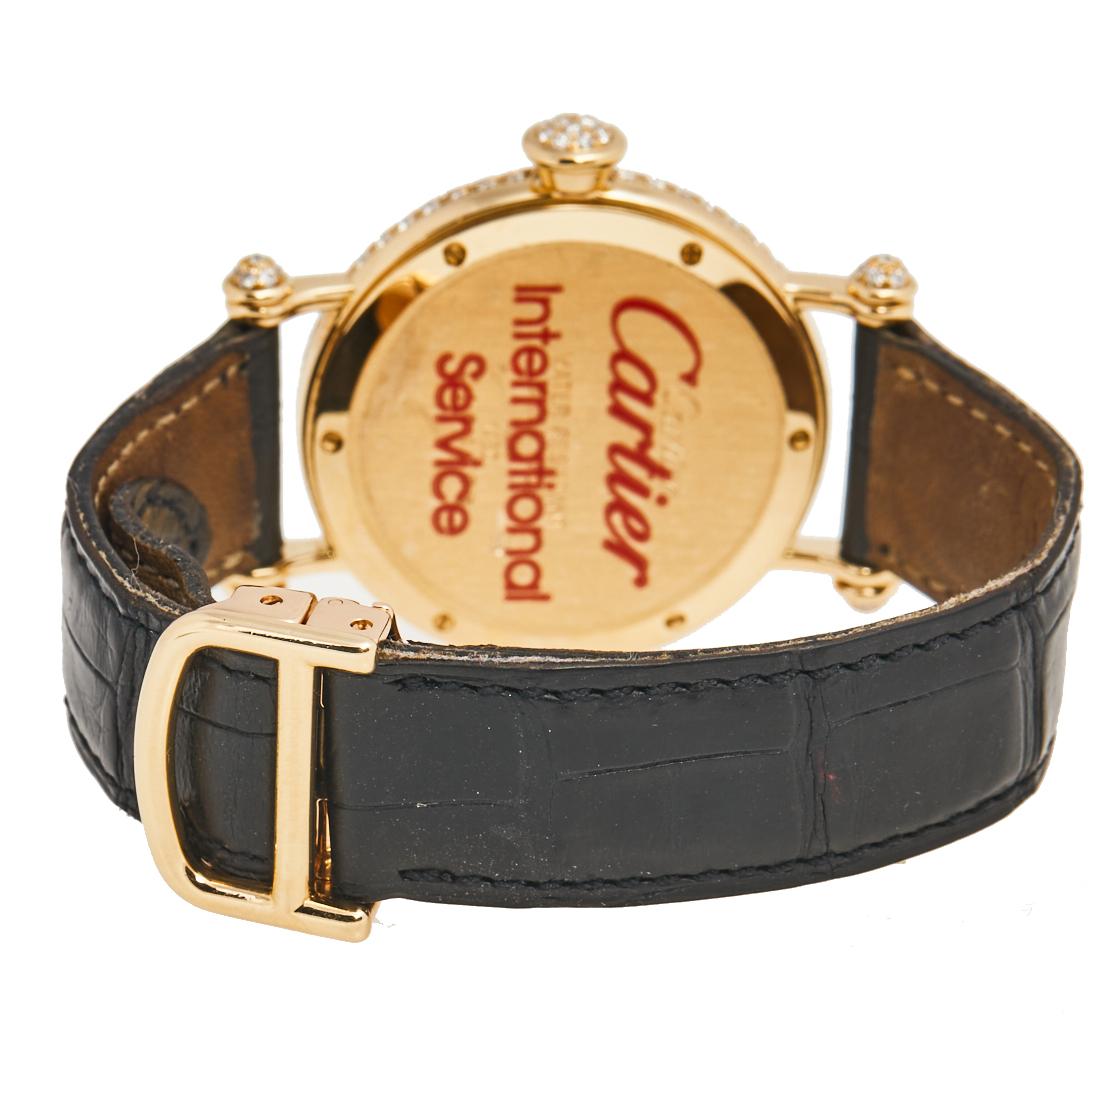 Dazzle the eyes that fall on you when you flaunt this Diabolo timepiece from Cartier on your wrist. Swiss-made, it has a gorgeous case crafted from 18K yellow gold, decorated wonderfully with diamonds, and held by a leather bracelet. The watch